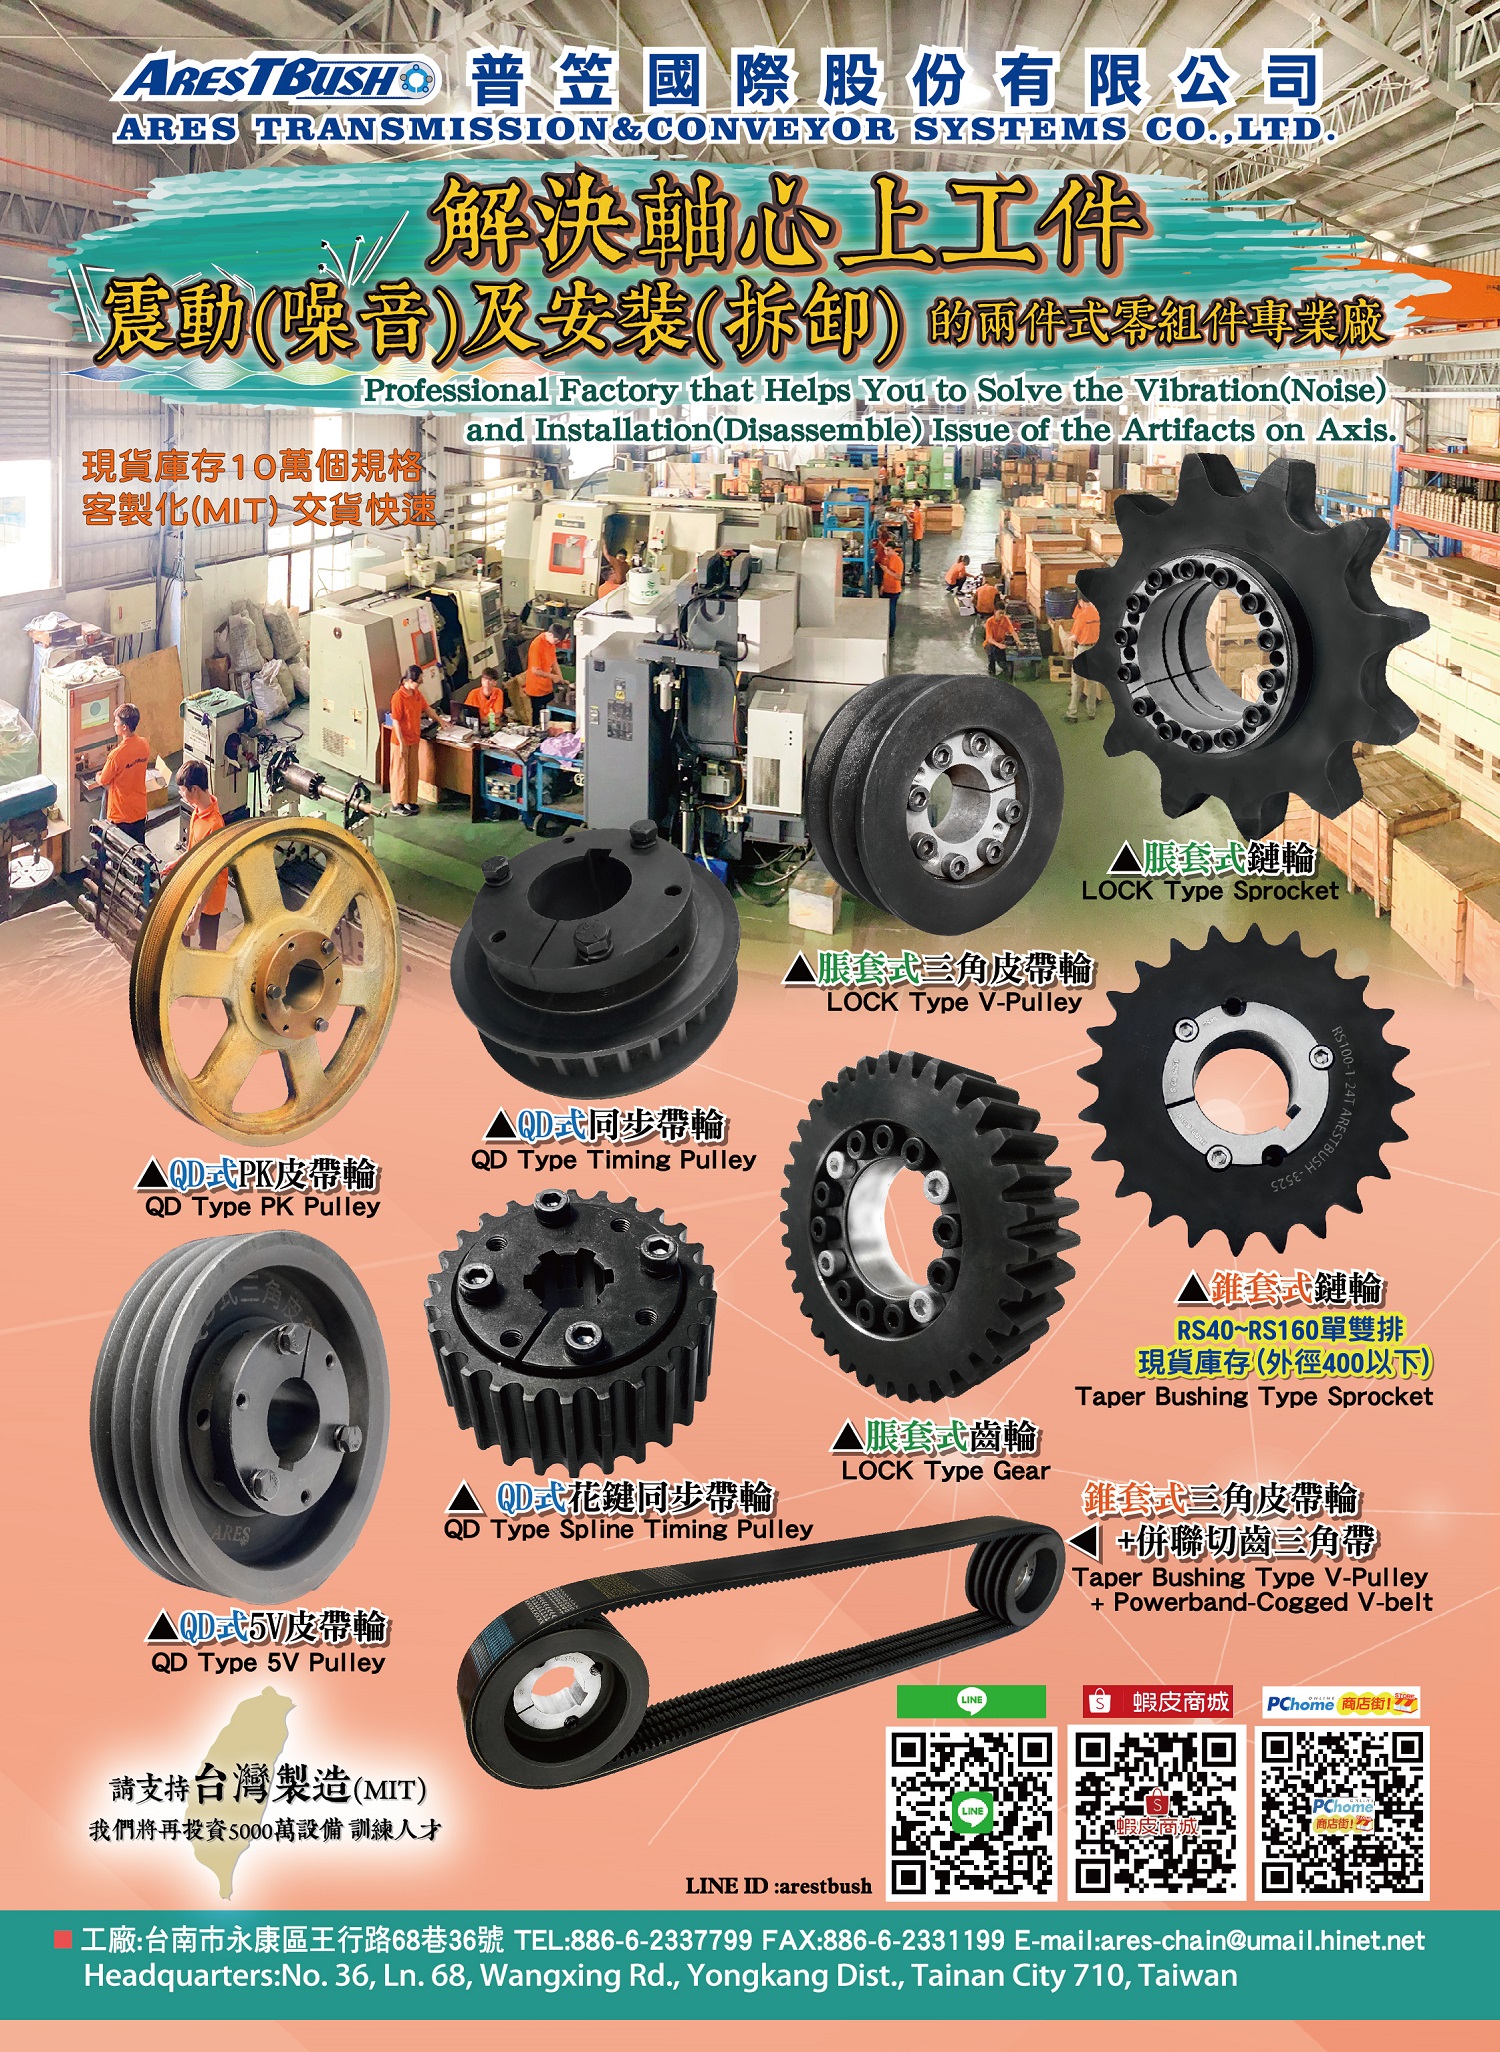 ARES TRANSMISSION & CONVEYOR SYSTEMS CO., LTD.